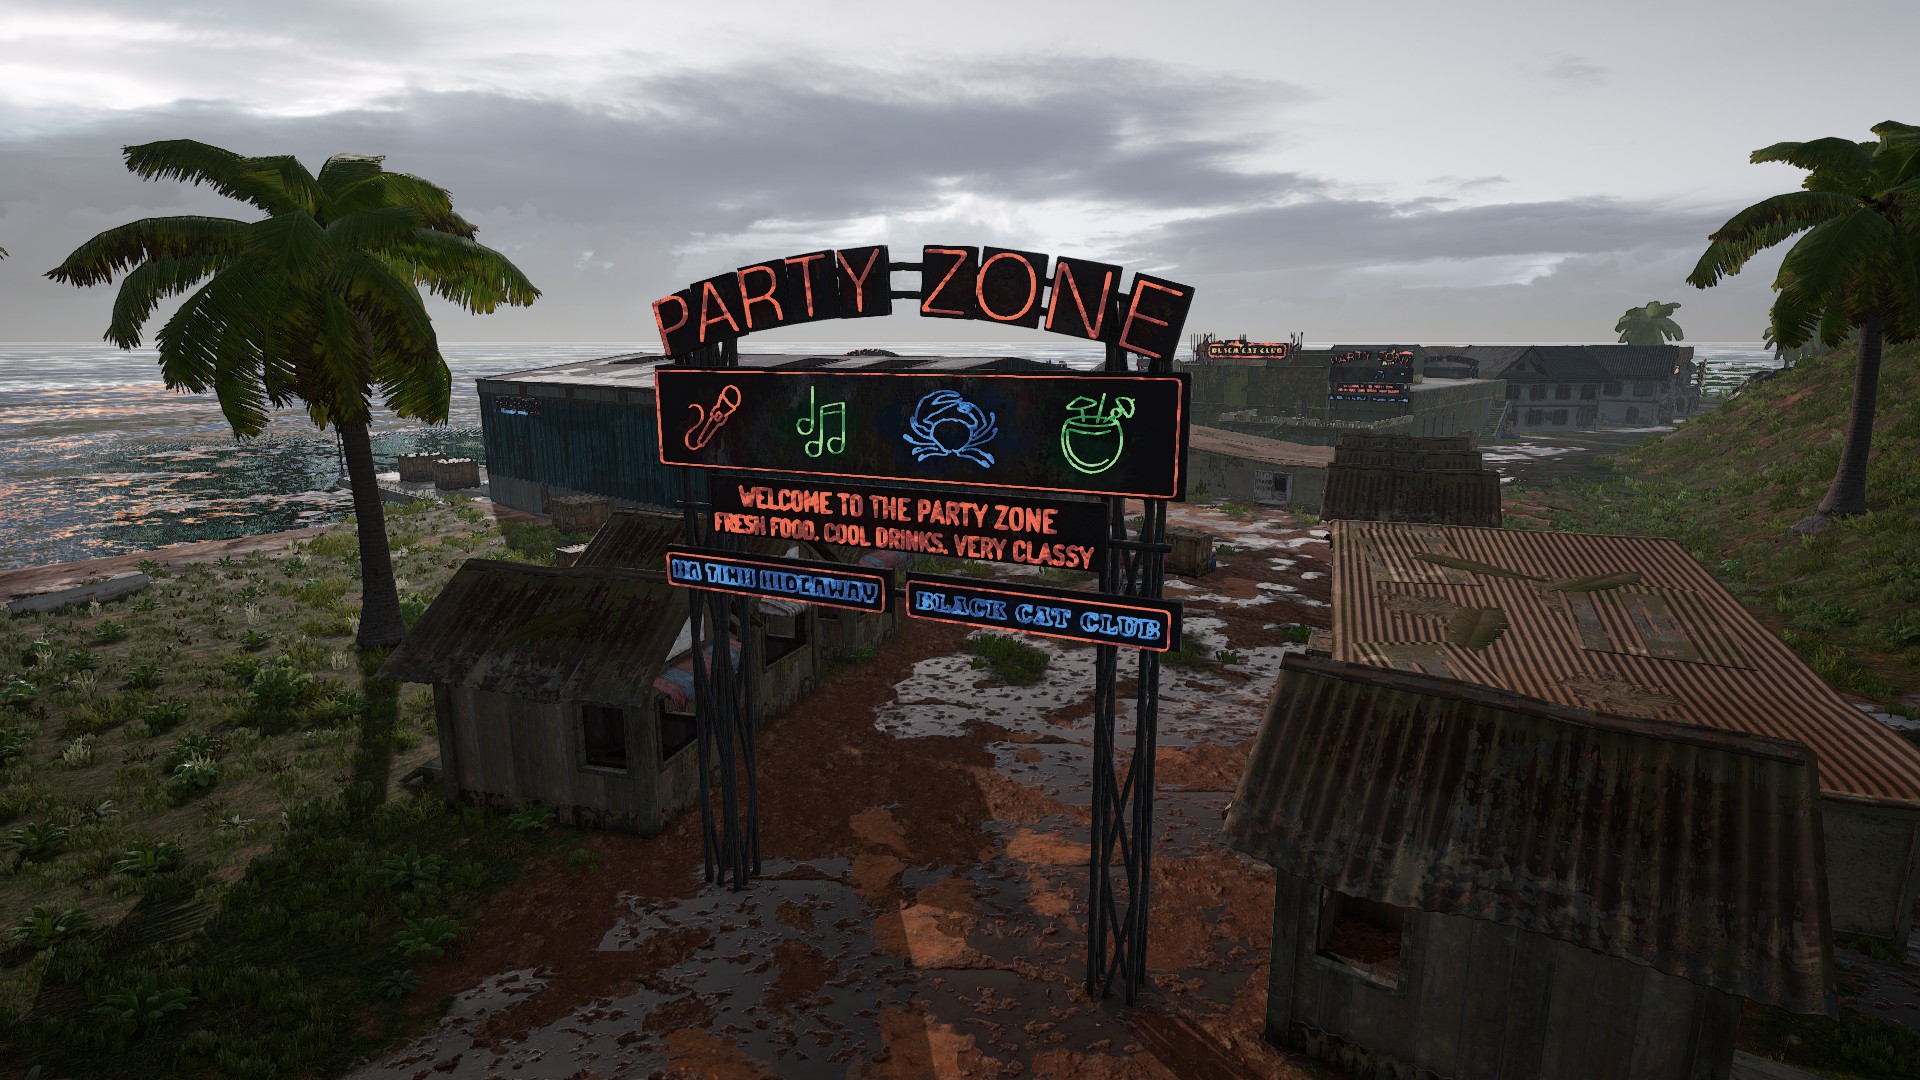 PUBG Sanhok drops: Sanhok's neon sign at the Party Zone, with several small buildings in the background.